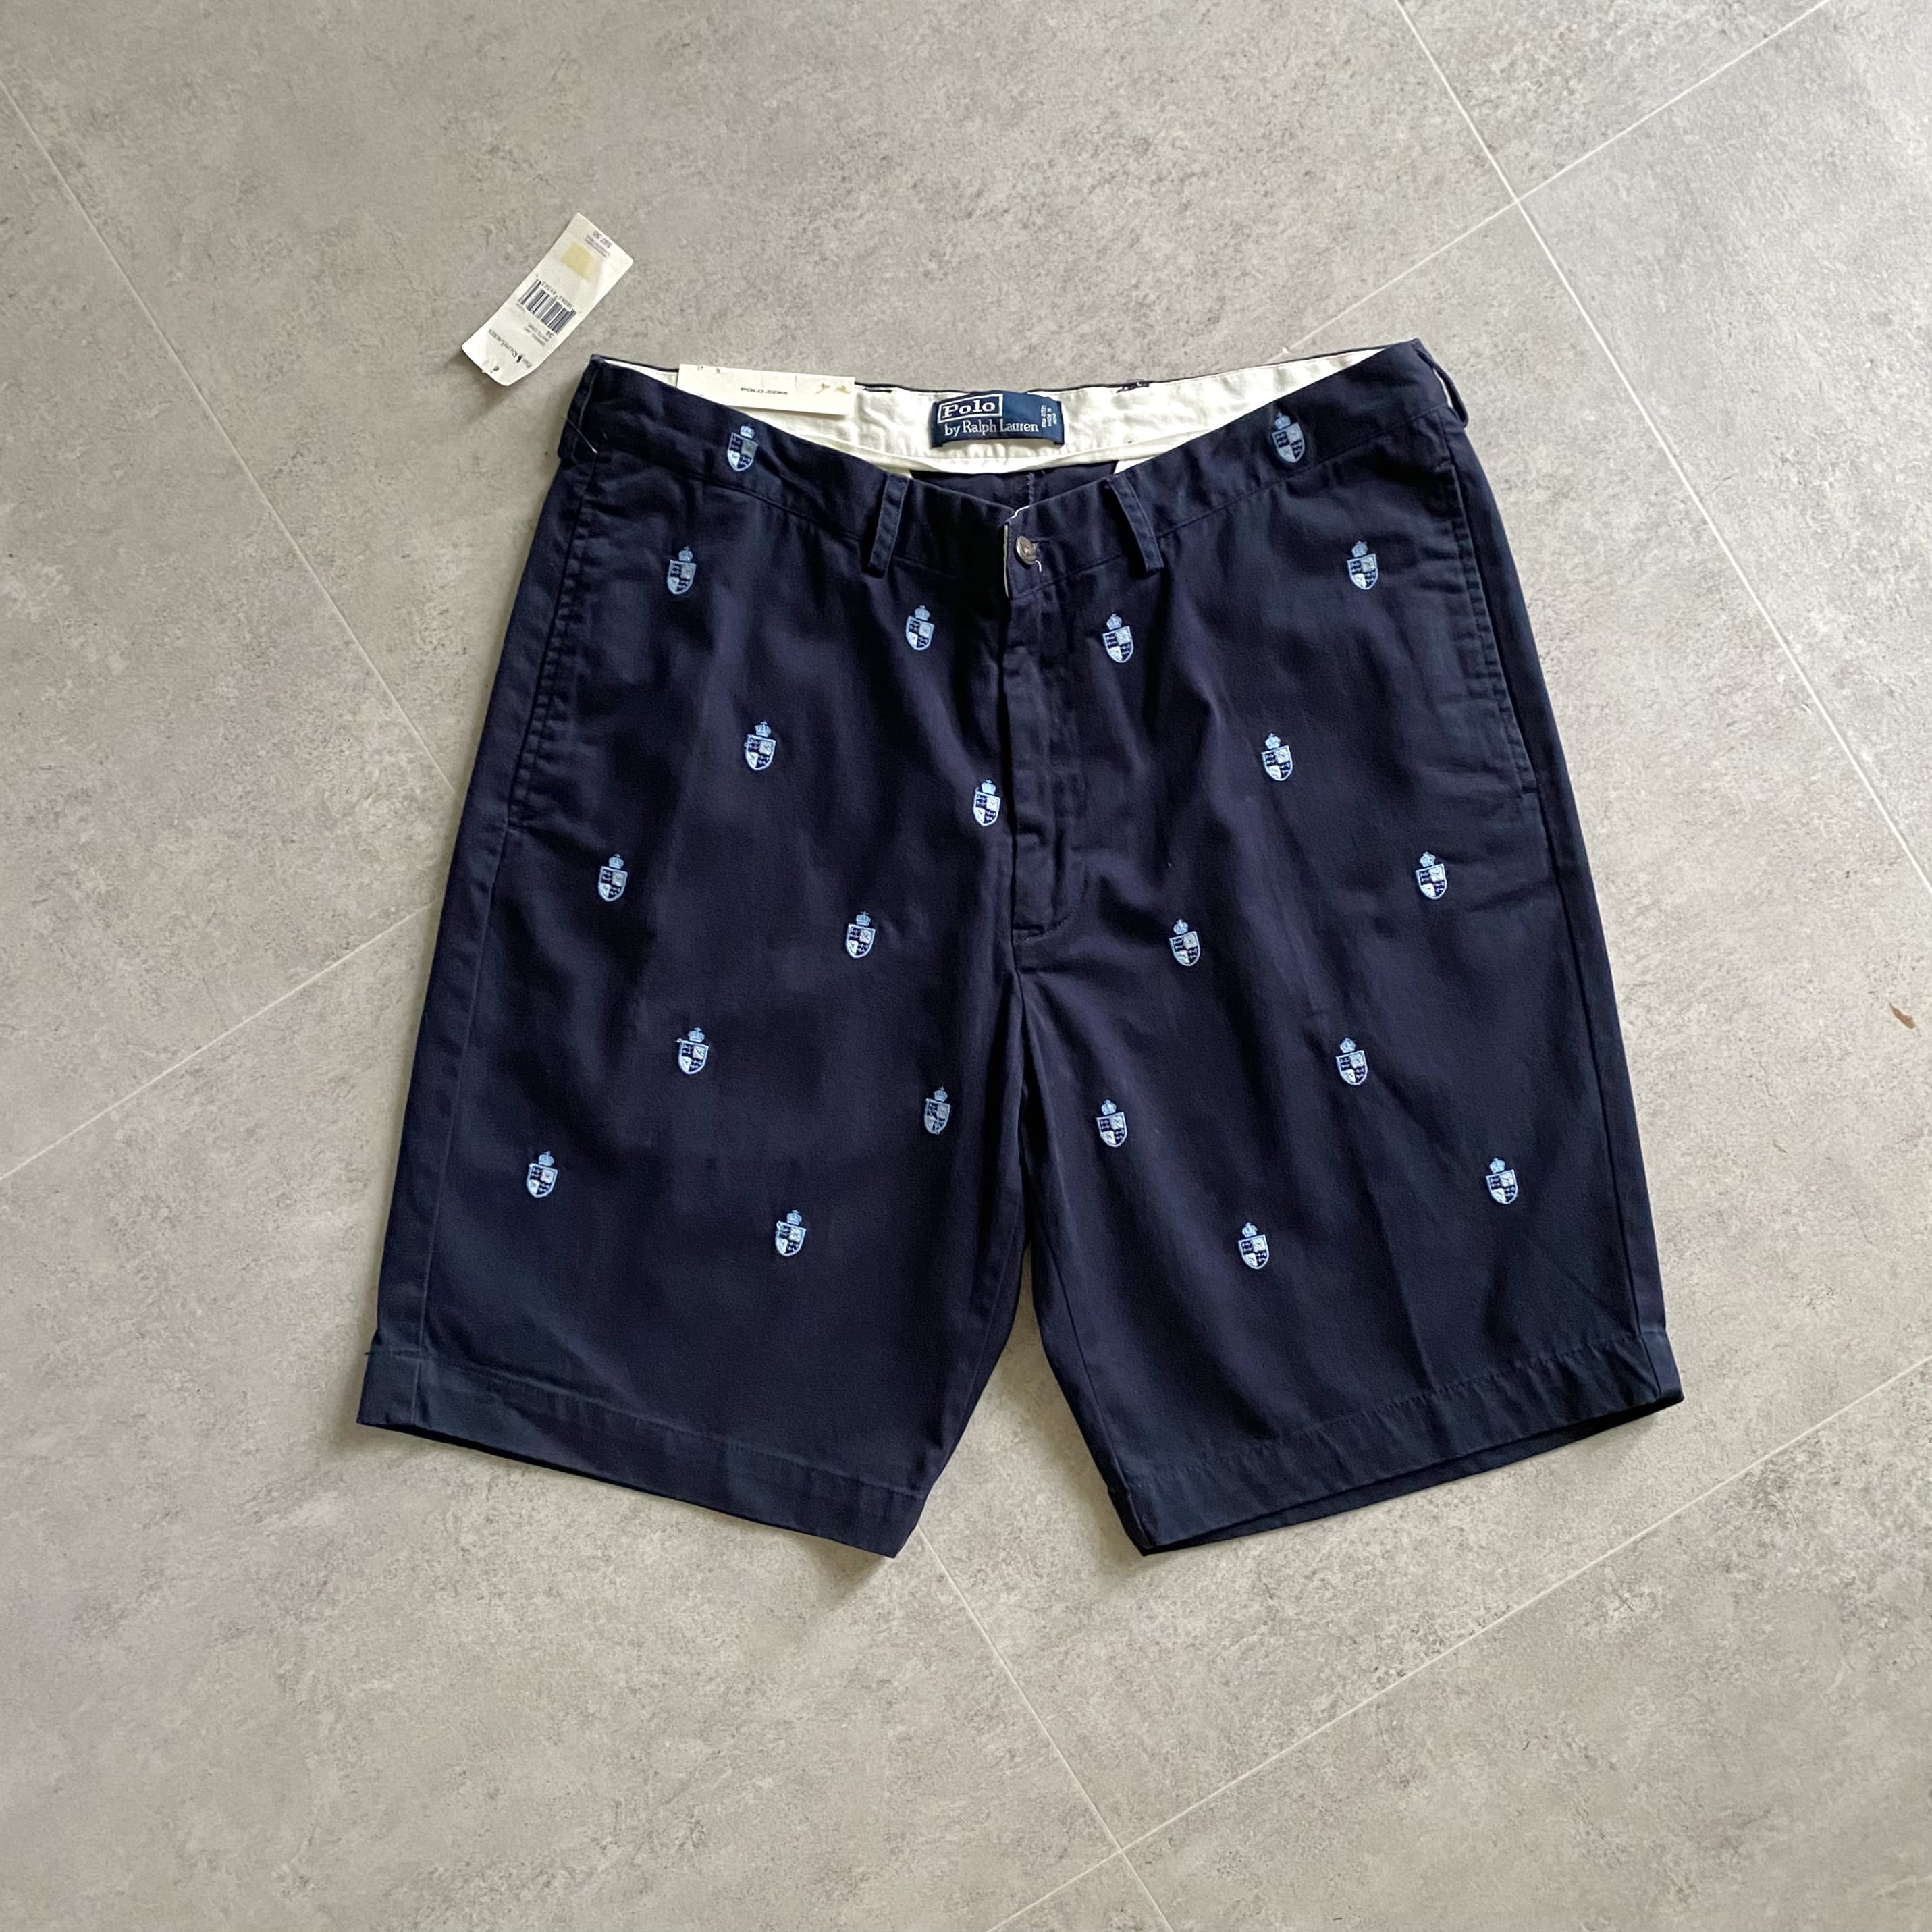 Polo Ralph Lauren Embroidered Cotton Shorts 35 Size Deadstock - 체리피커